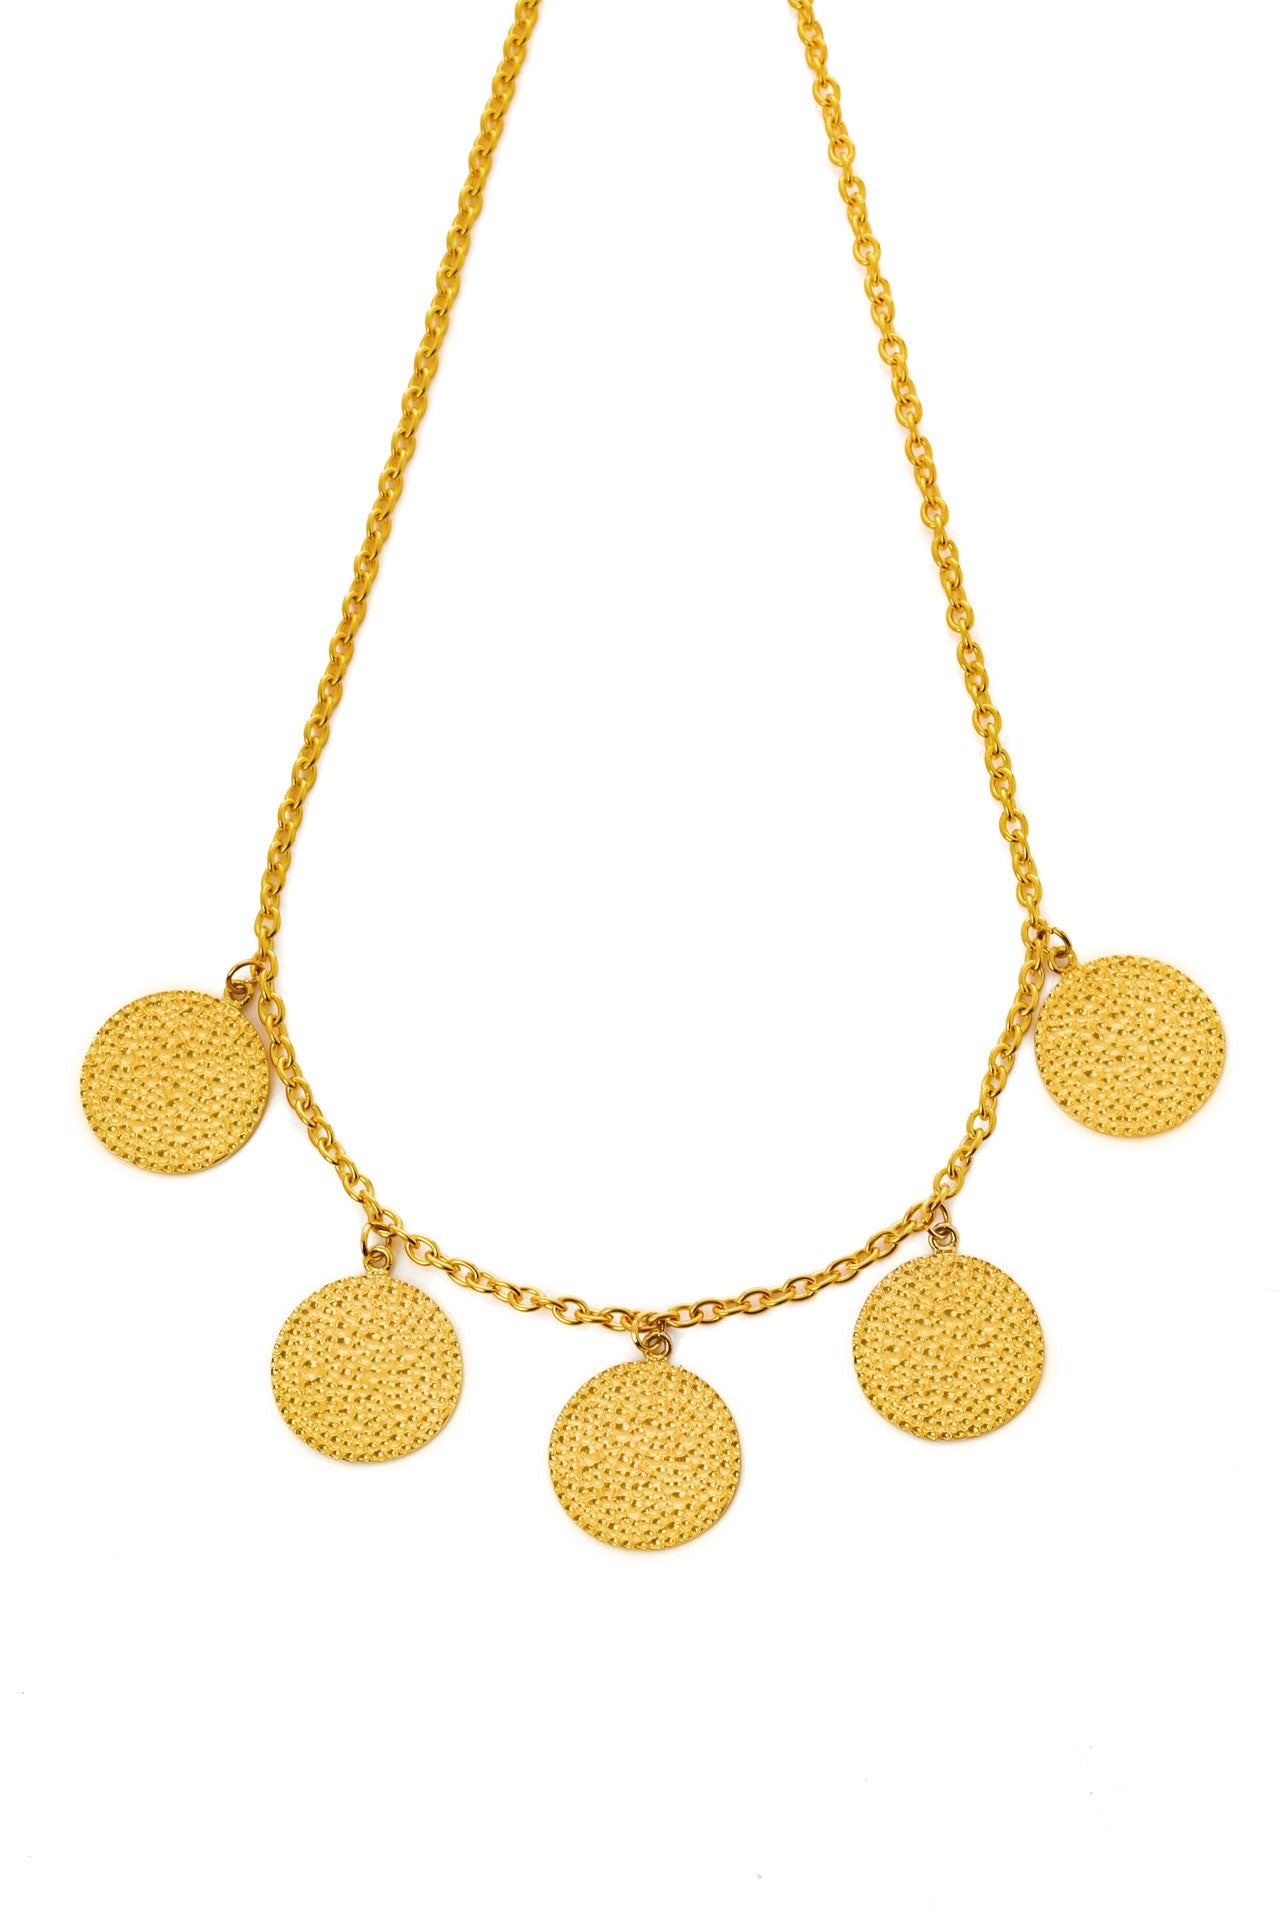 Gisele small necklace brass  by Pearl Martini